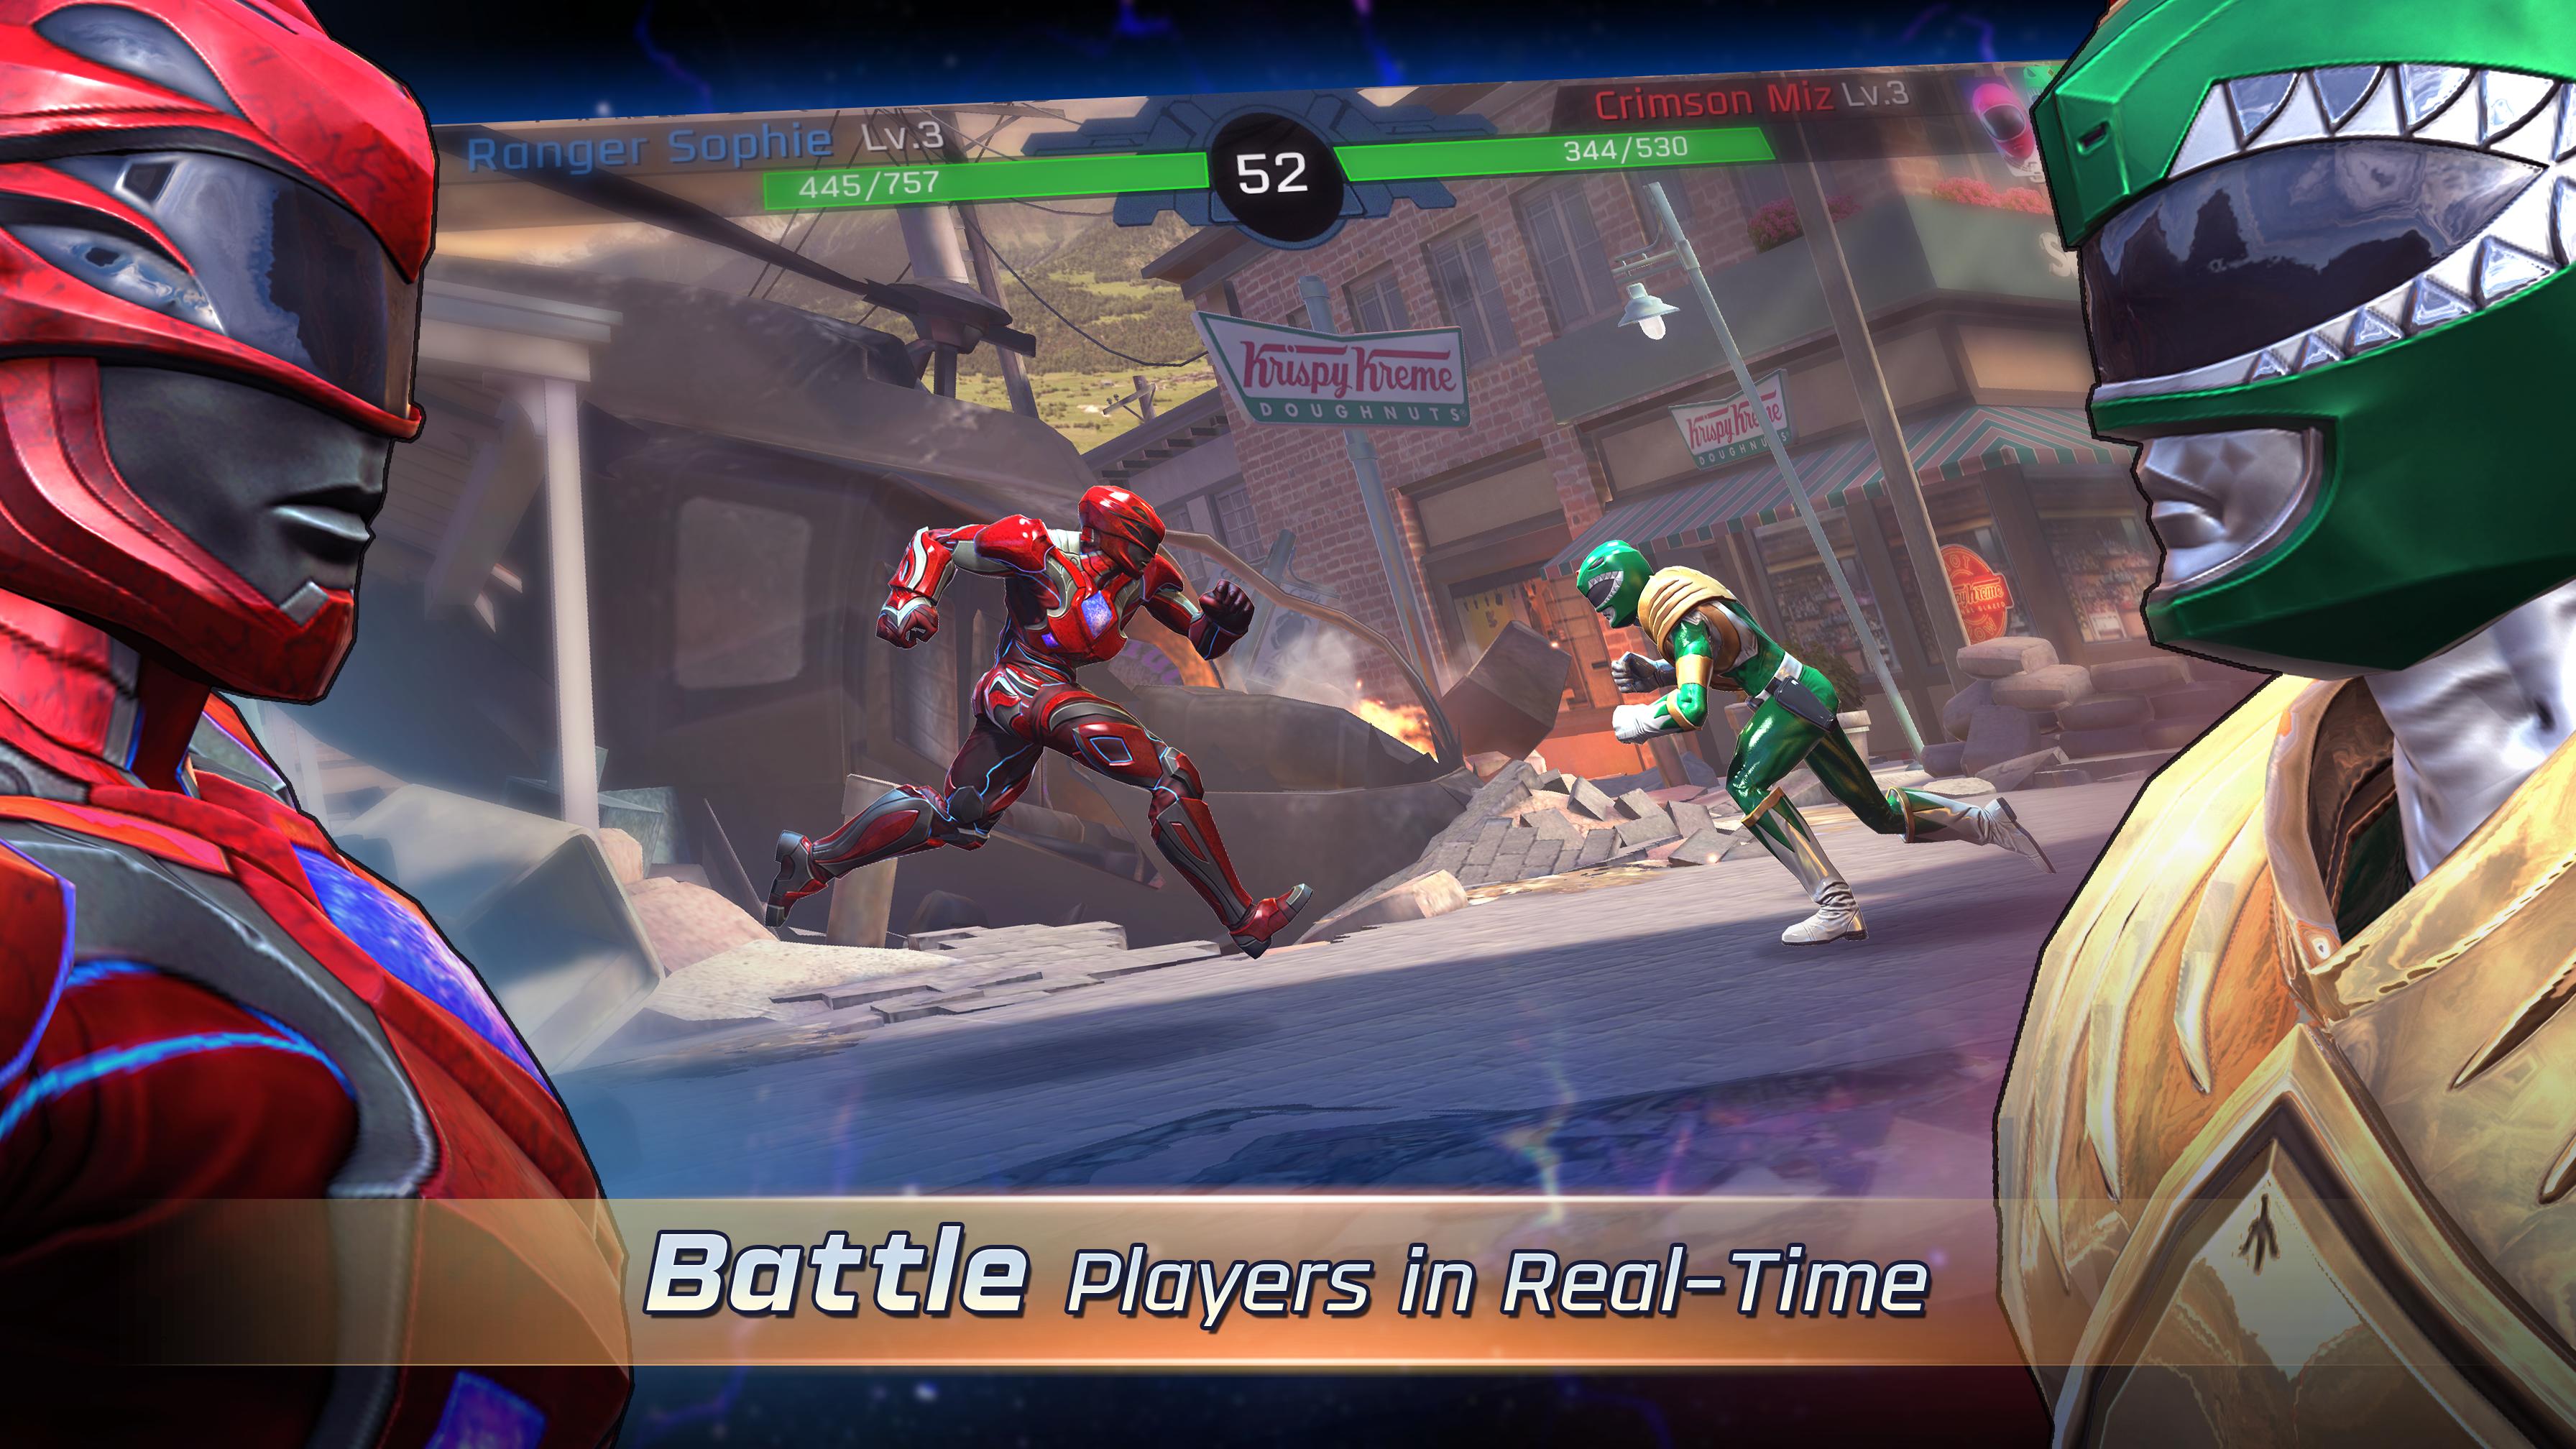 Power Rangers For Android Apk Download - ninja storm ranger form on roblox game